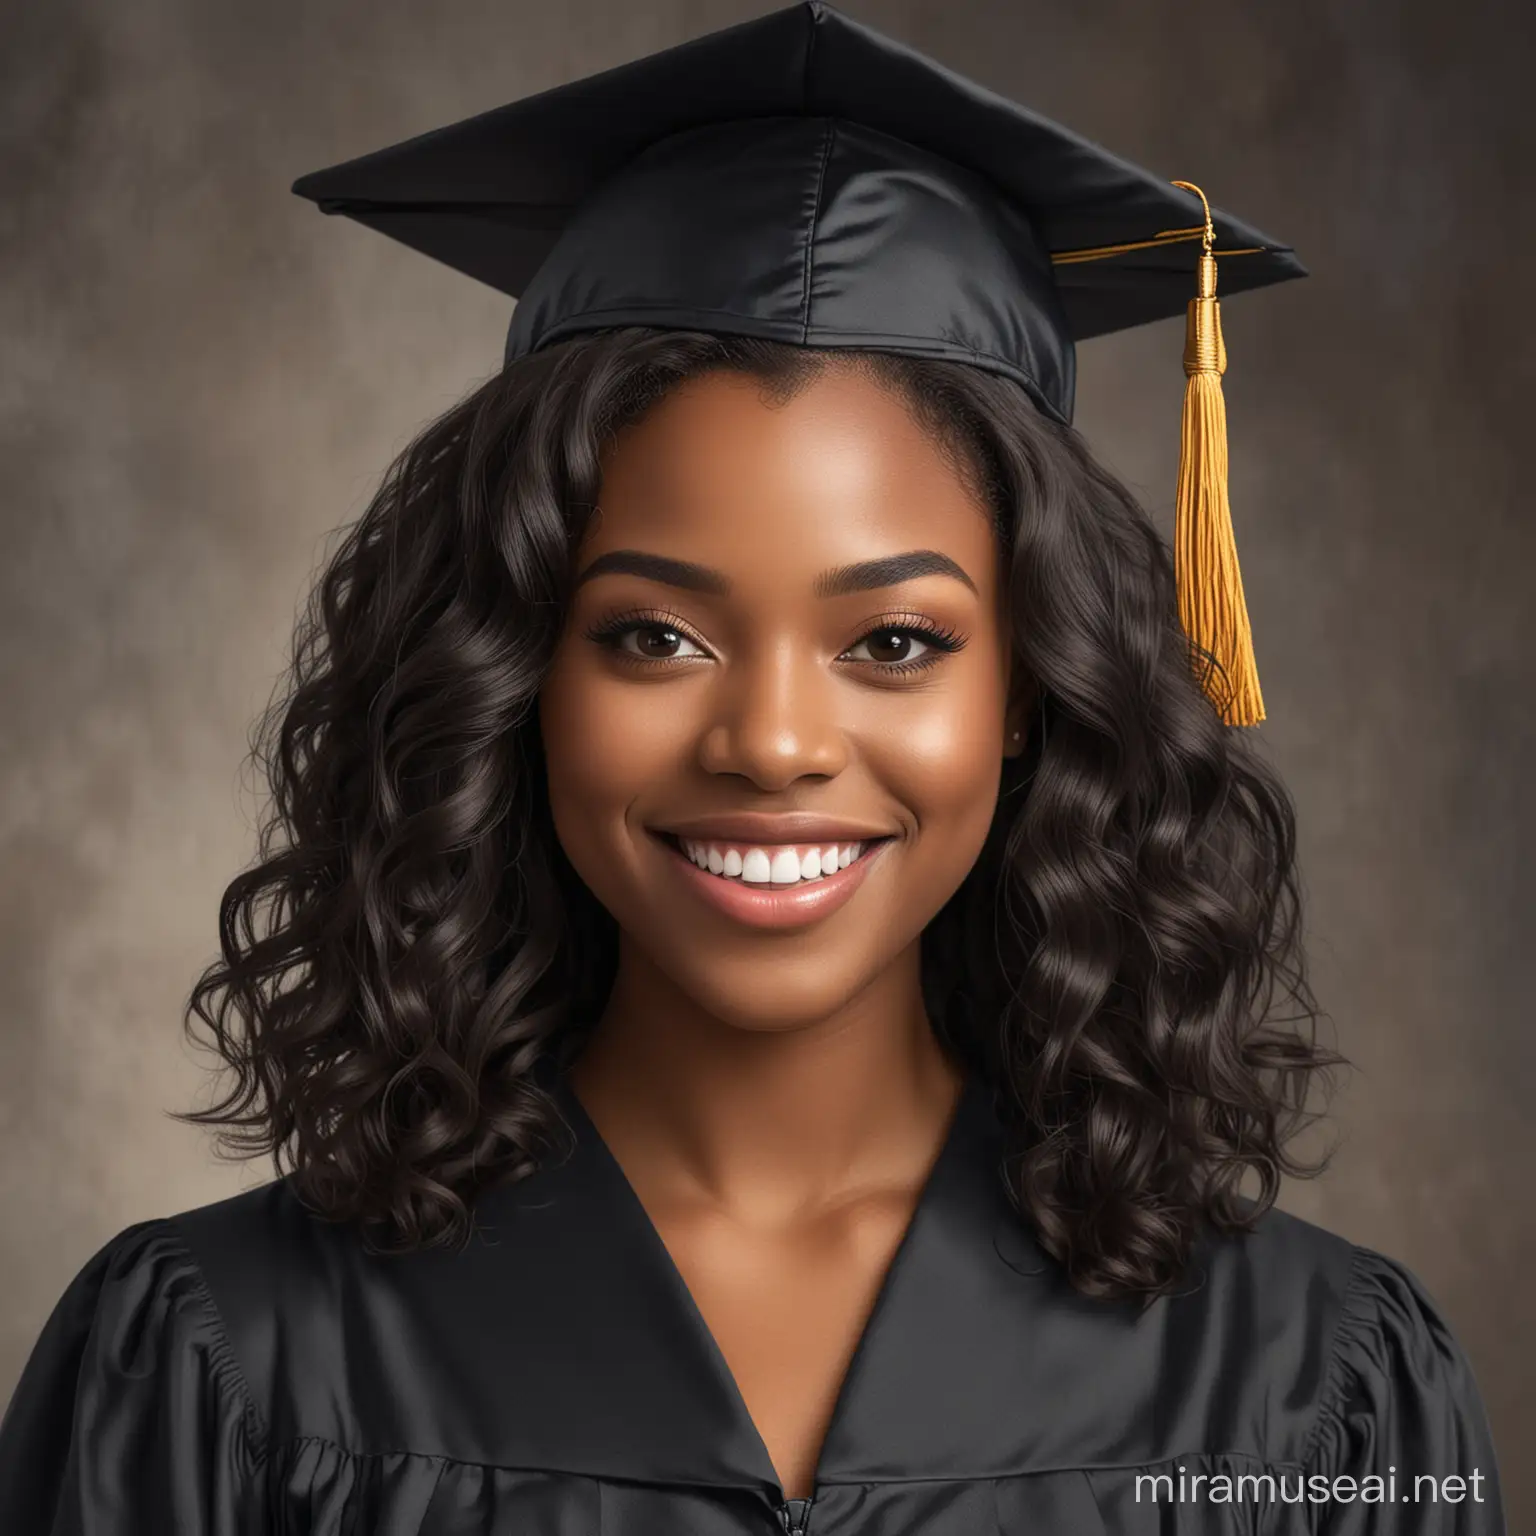 generate me a ai prompt image of a beautiful black african american female in her graduation cap and gown she has black wavy hair make up is flawless and a beautiful smile.